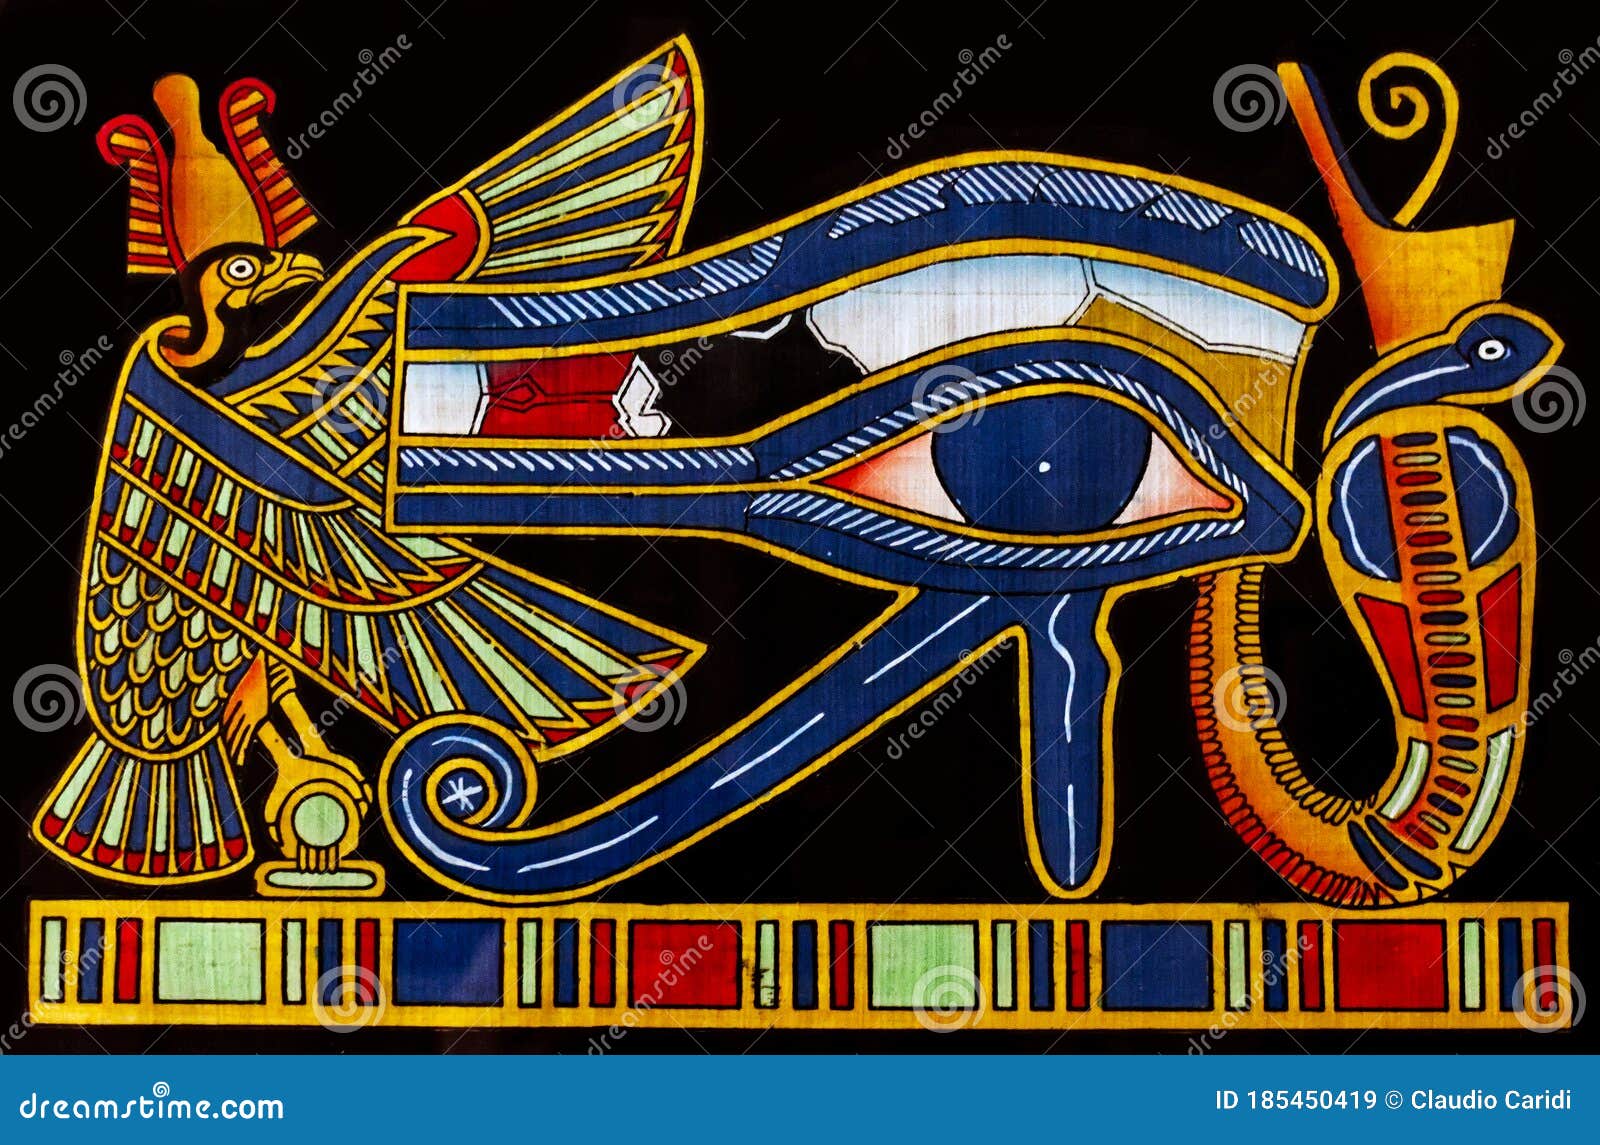 egyptian papyrus with the eye of horus, also known as the eye of god ra.